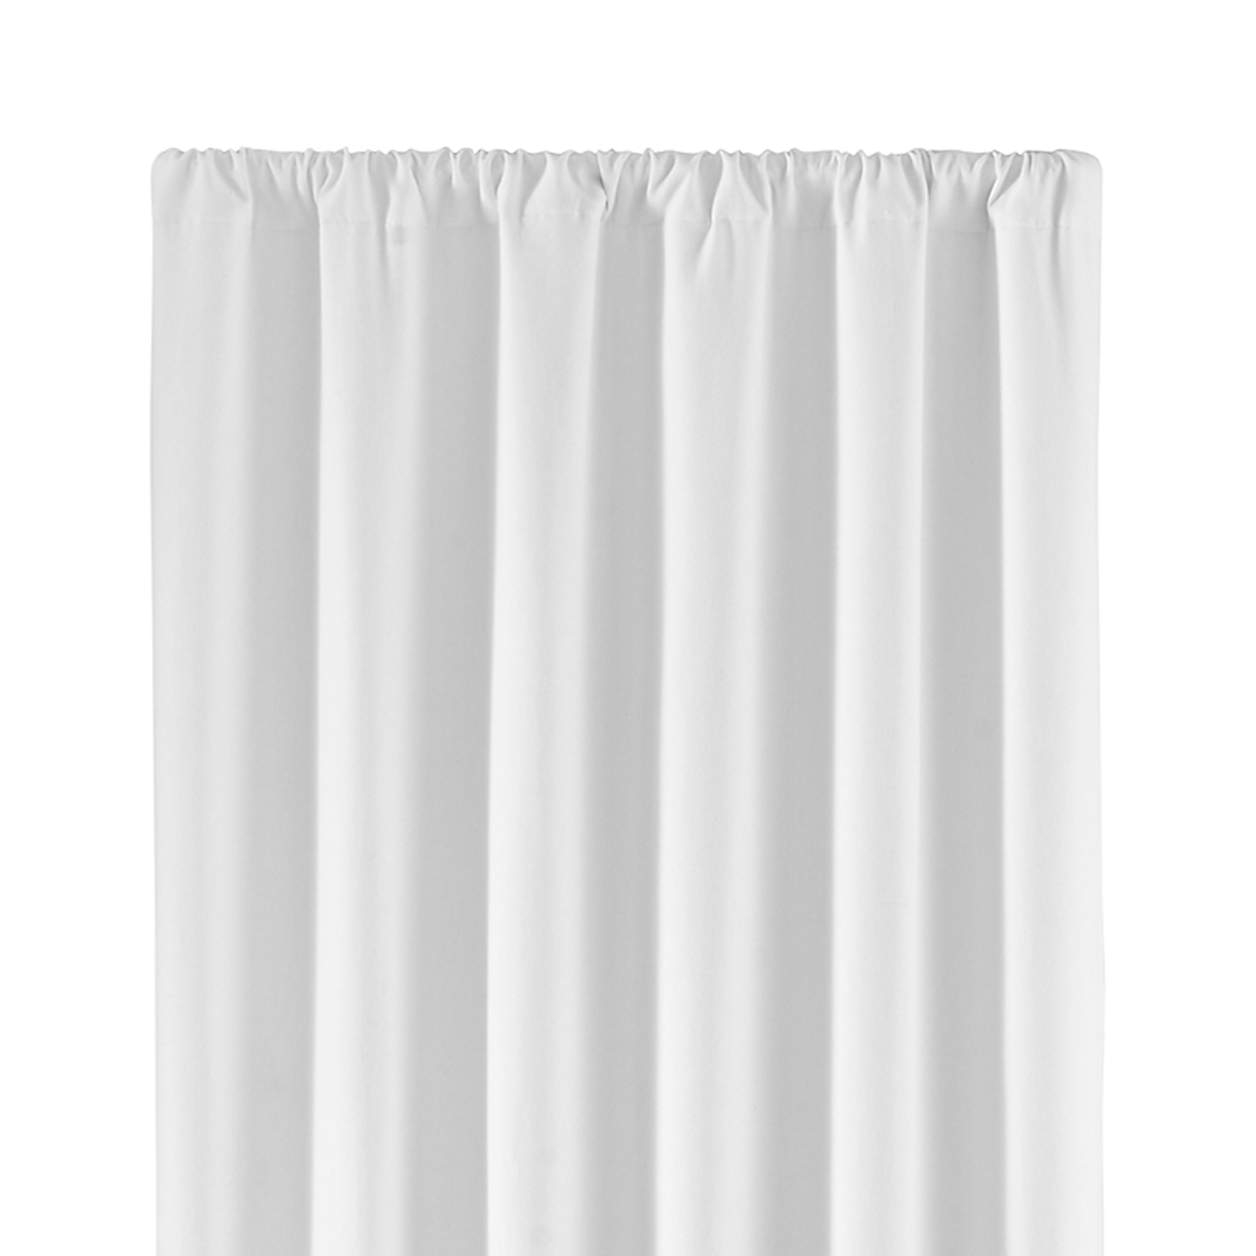 Wallace Blackout Curtains, White, 52" x 84" - Image 1